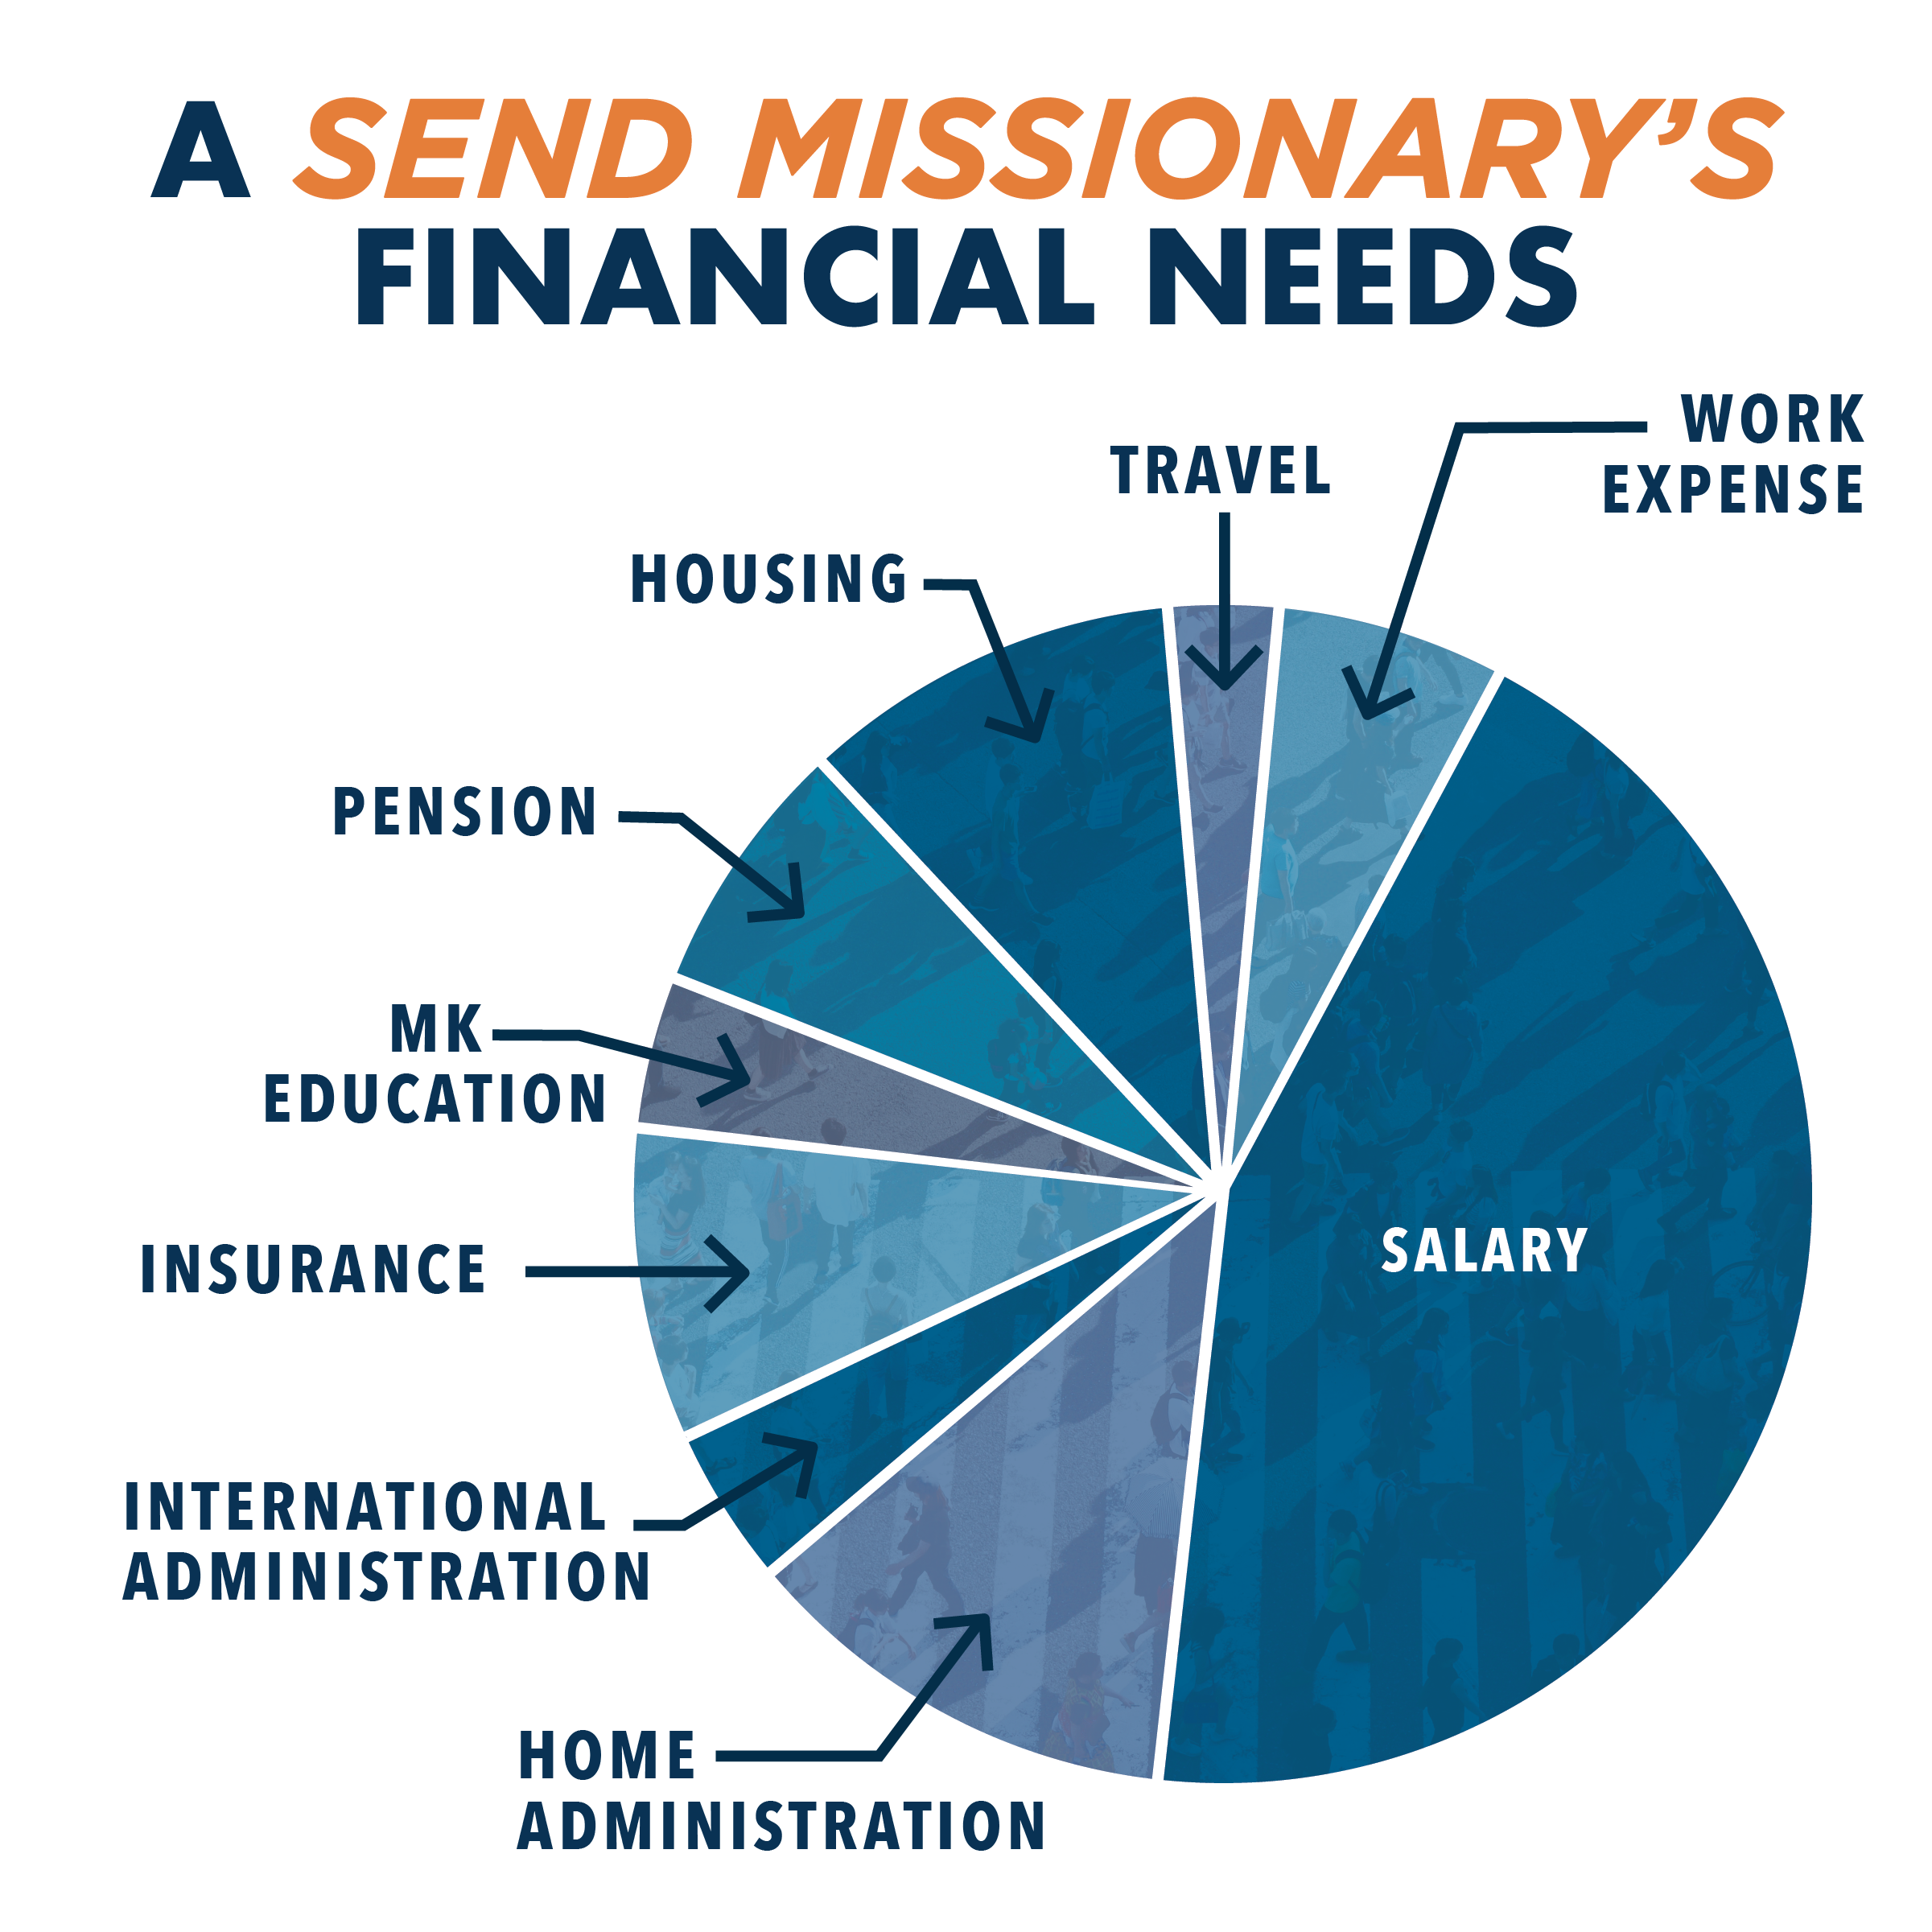 Pie chart describing costs to support your missionary